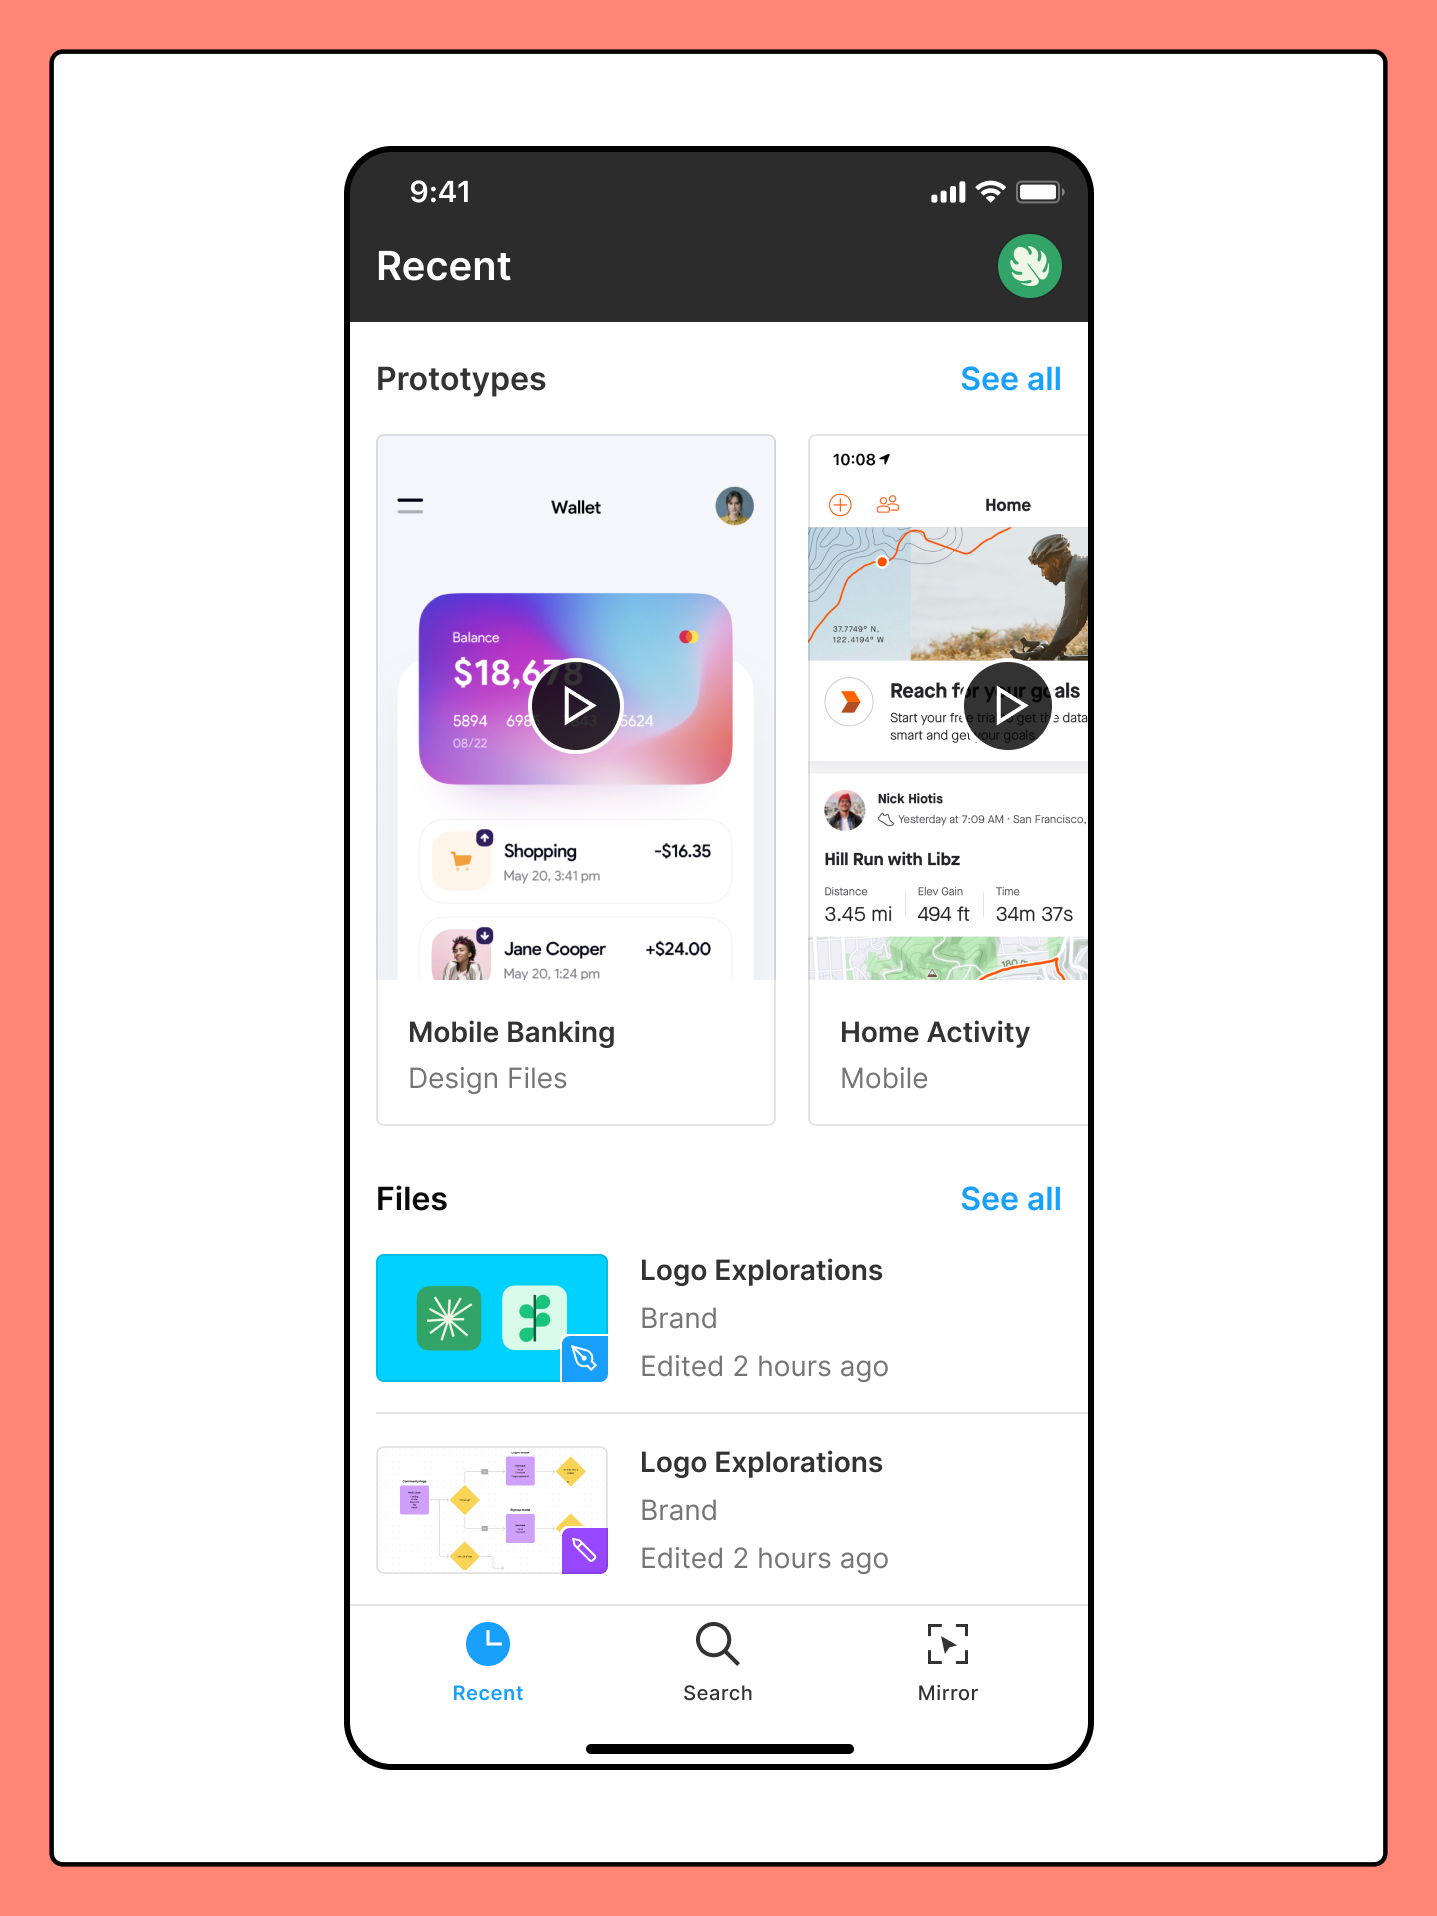 Recent_screen_of_the_Figma_mobile_app.png